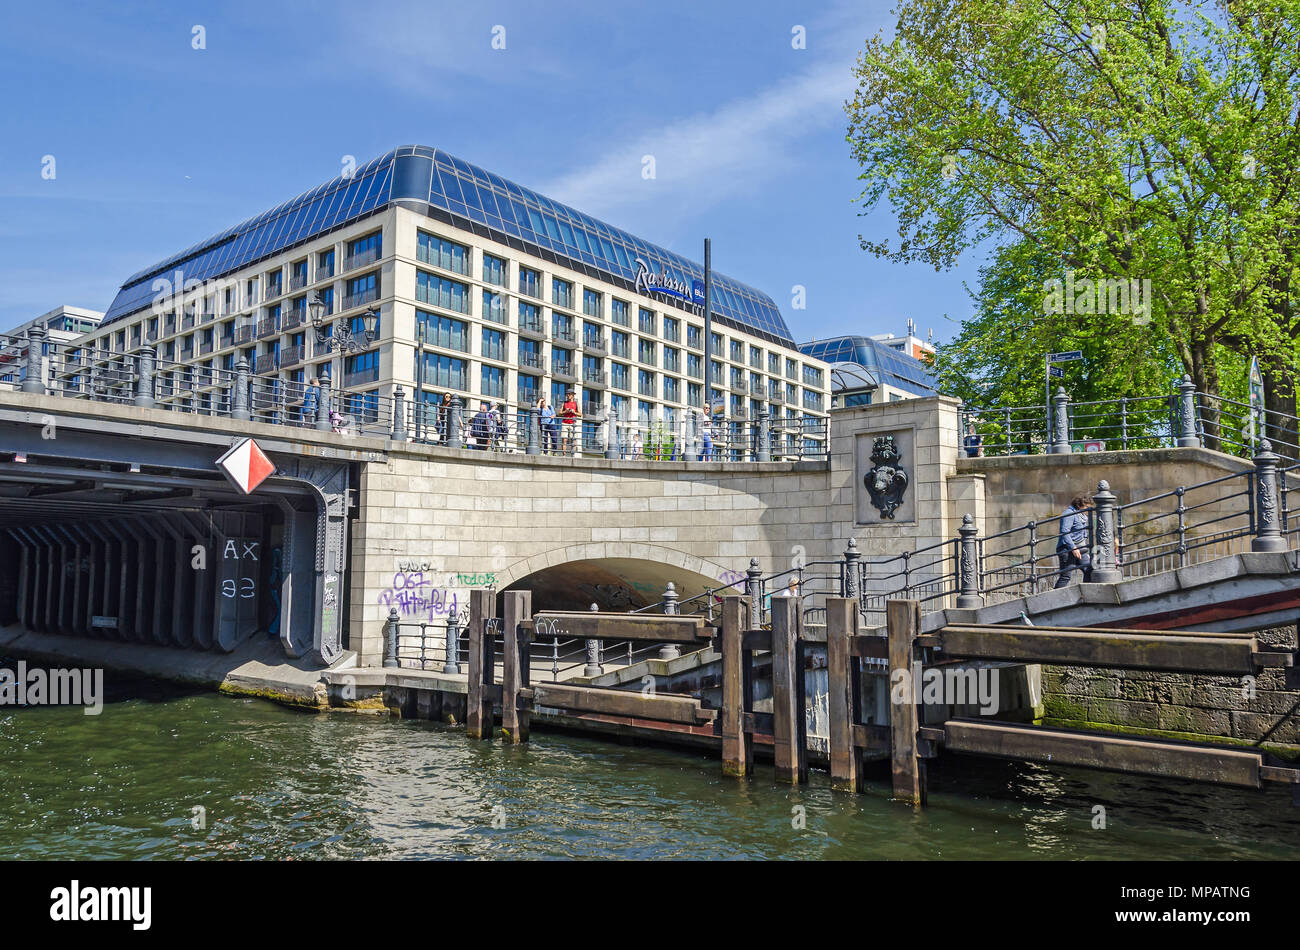 Berlin, Germany - April 22, 2018: View from the river Spree at its eastern shore, the Liebknecht bridge with its hystorical bear head and the Radisson Stock Photo